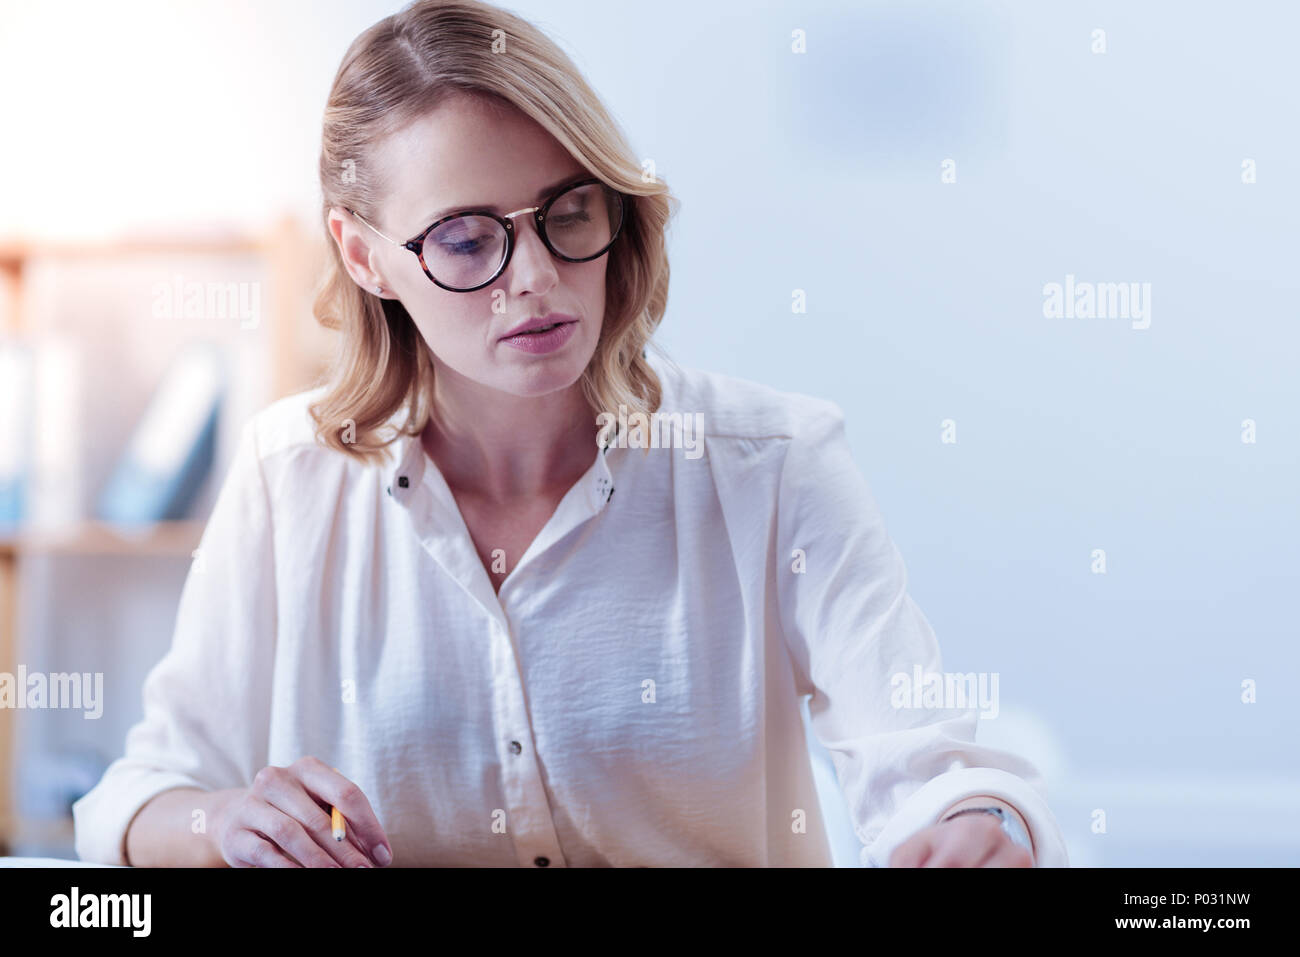 Attractive pleasant woman being involved in work Stock Photo